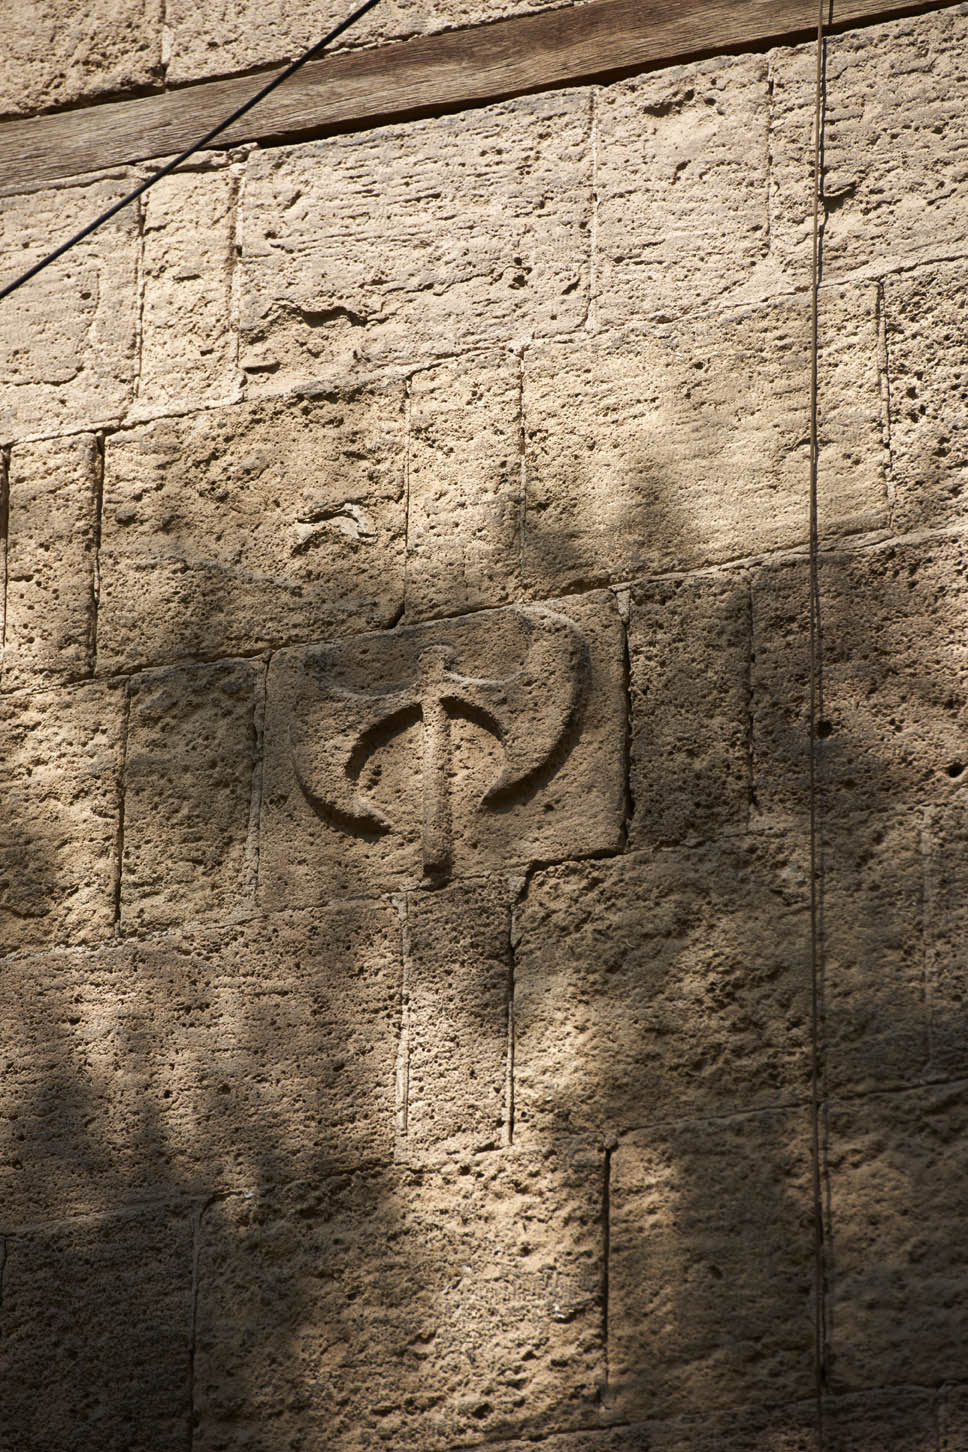 Detail of doubled-headed axe motif